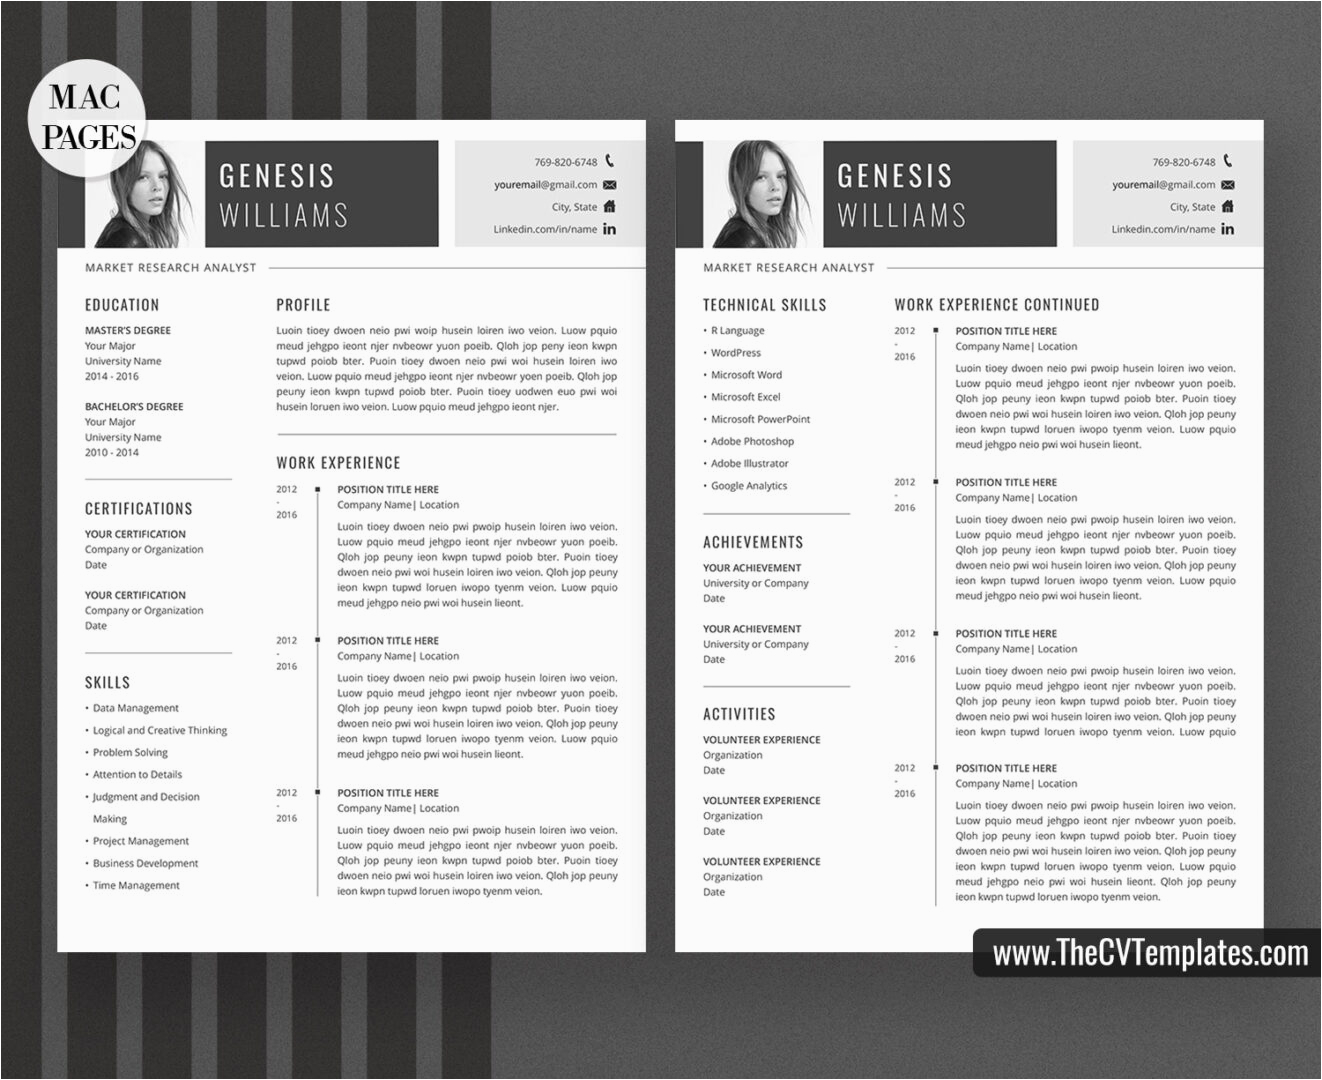 mac pages cv template curriculum vitae professional resume template cover letter modern resume creative resume simple resume minimalist cv template for apple pages 14